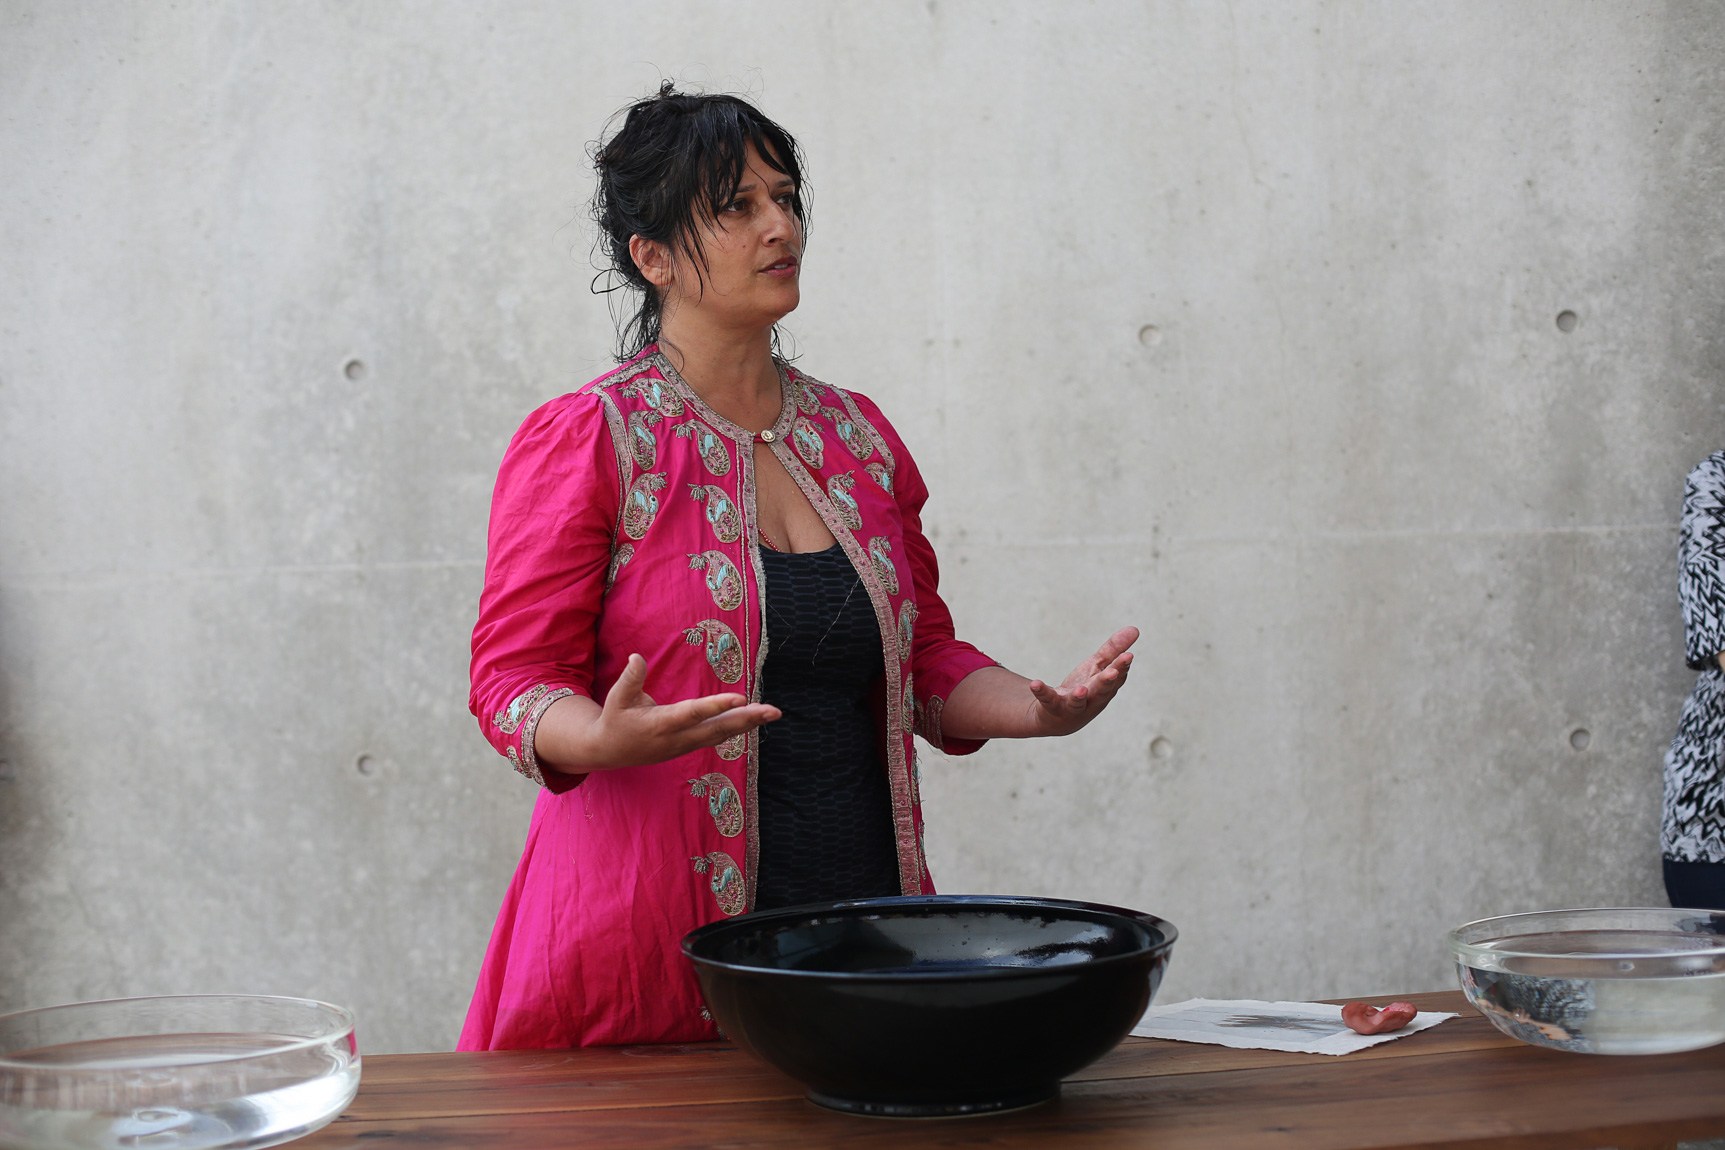 Bhanu Kapil stands behind a table with three bowls of water, speaking to the audience with her hands.